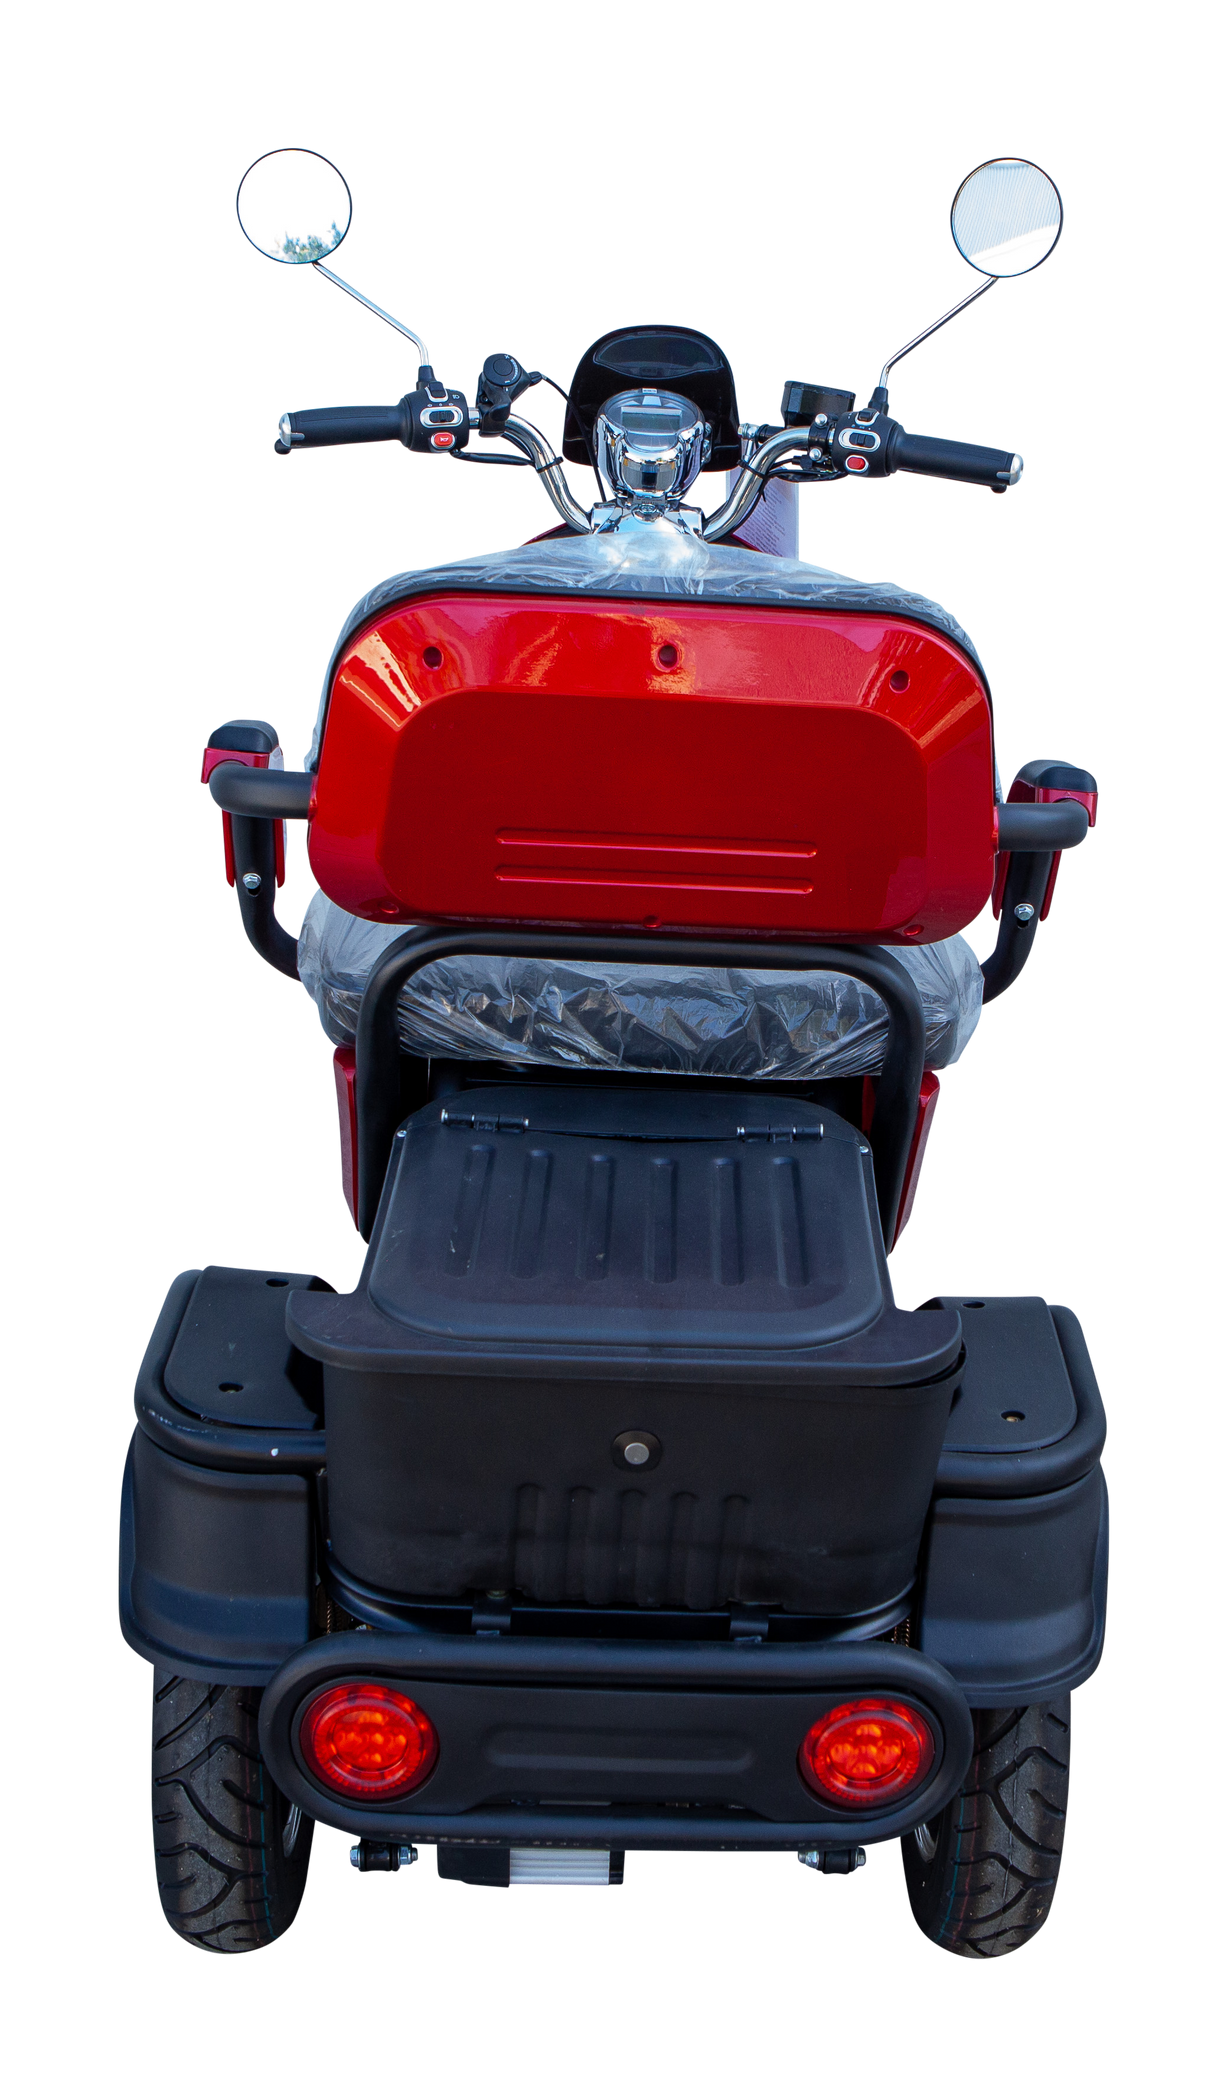 Pushpak 1000 2-Person Electric Mobility Scooter